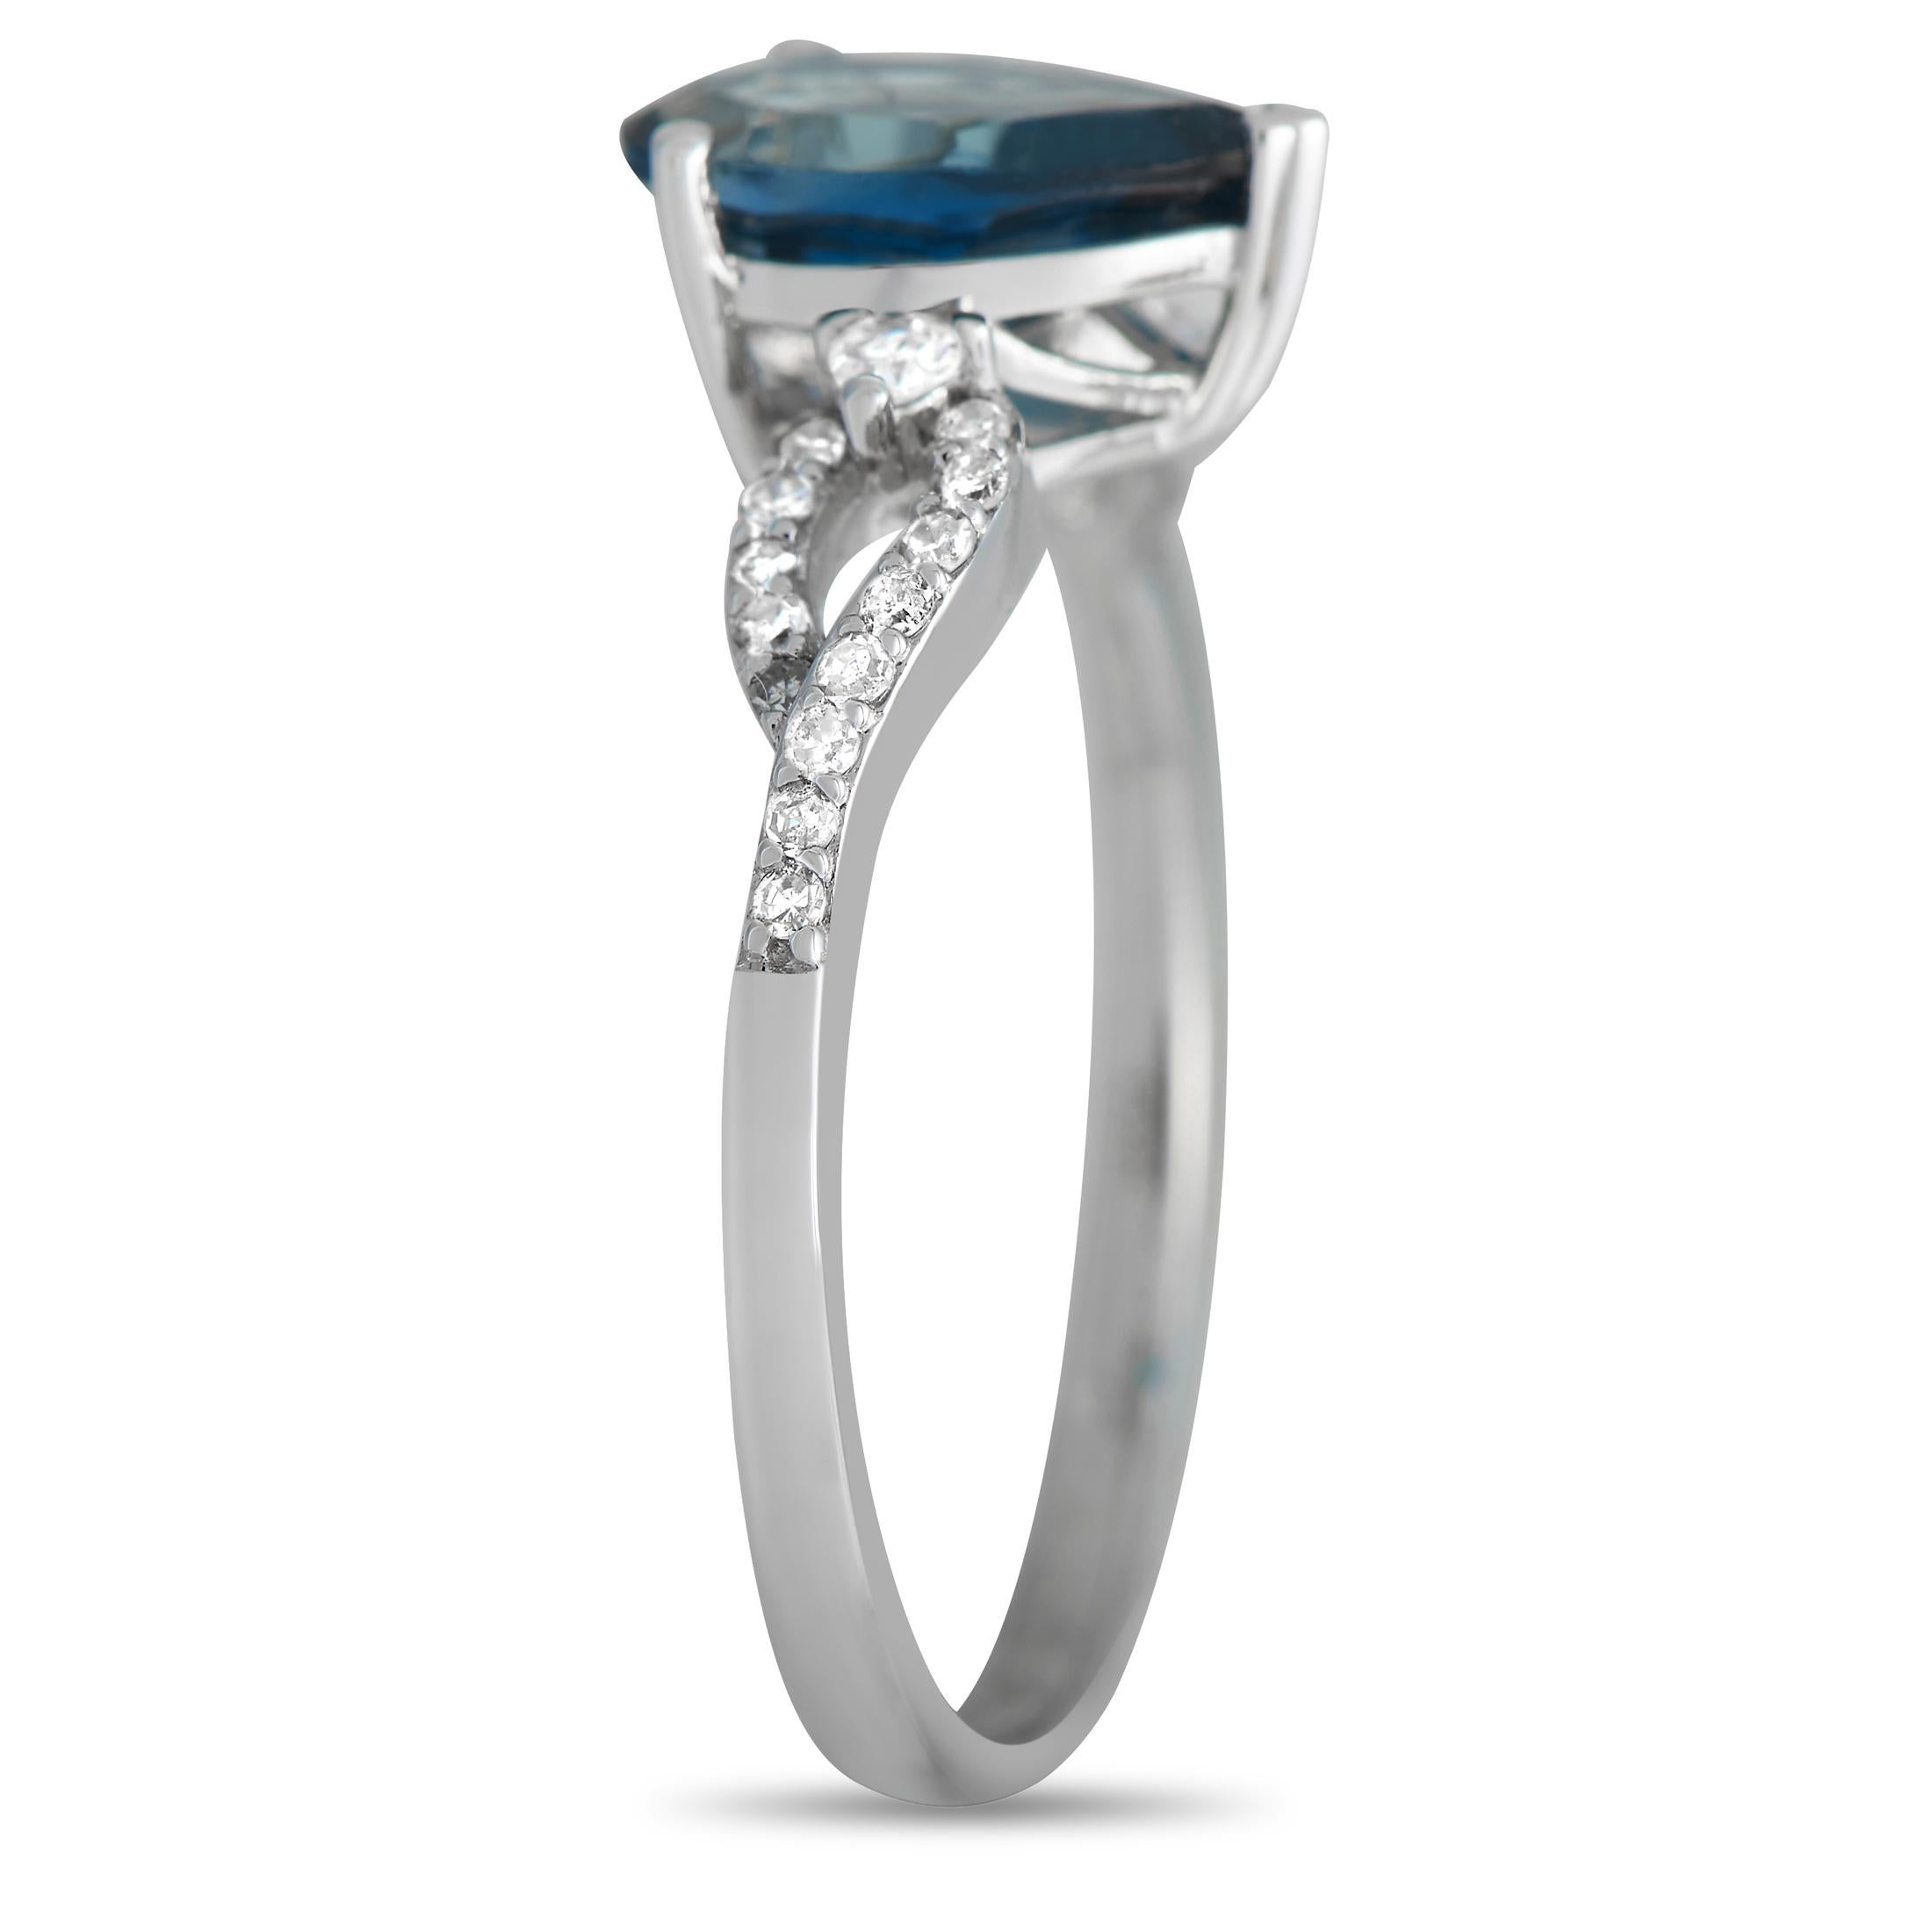 At the center of this rings intricate 14K White Gold setting, a breathtaking Topaz gemstone with a captivating blue hue serves as a stunning focal point. Ideal for everyday wear, this piece features a 2mm wide band and a 6mm top height. Diamonds